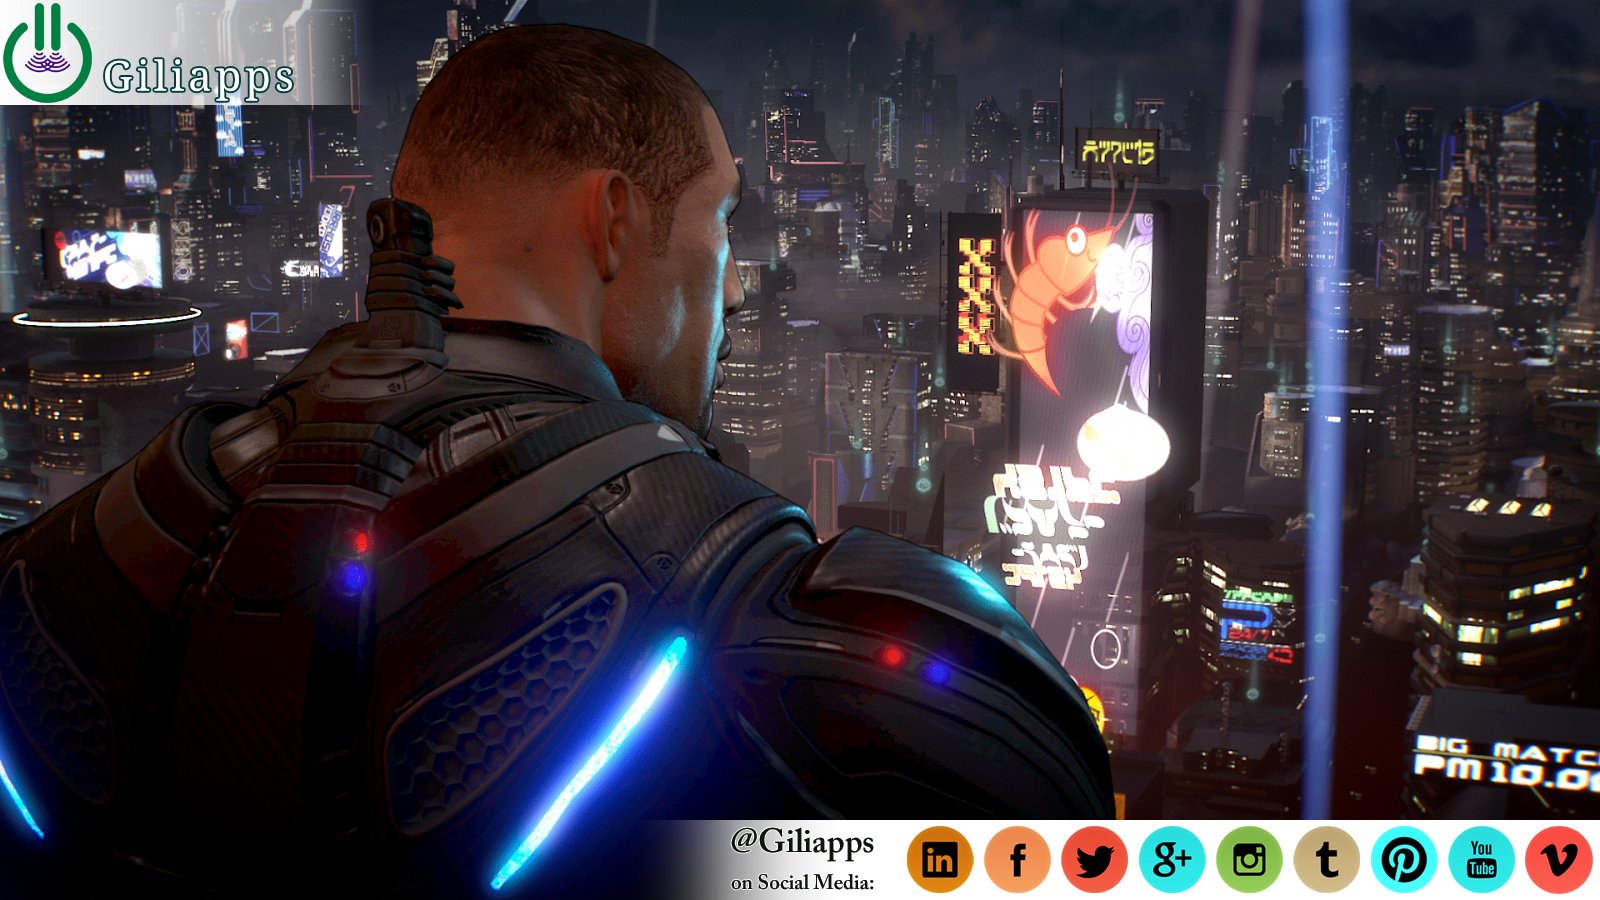 Crackdown 3: Still Has More Work to Do